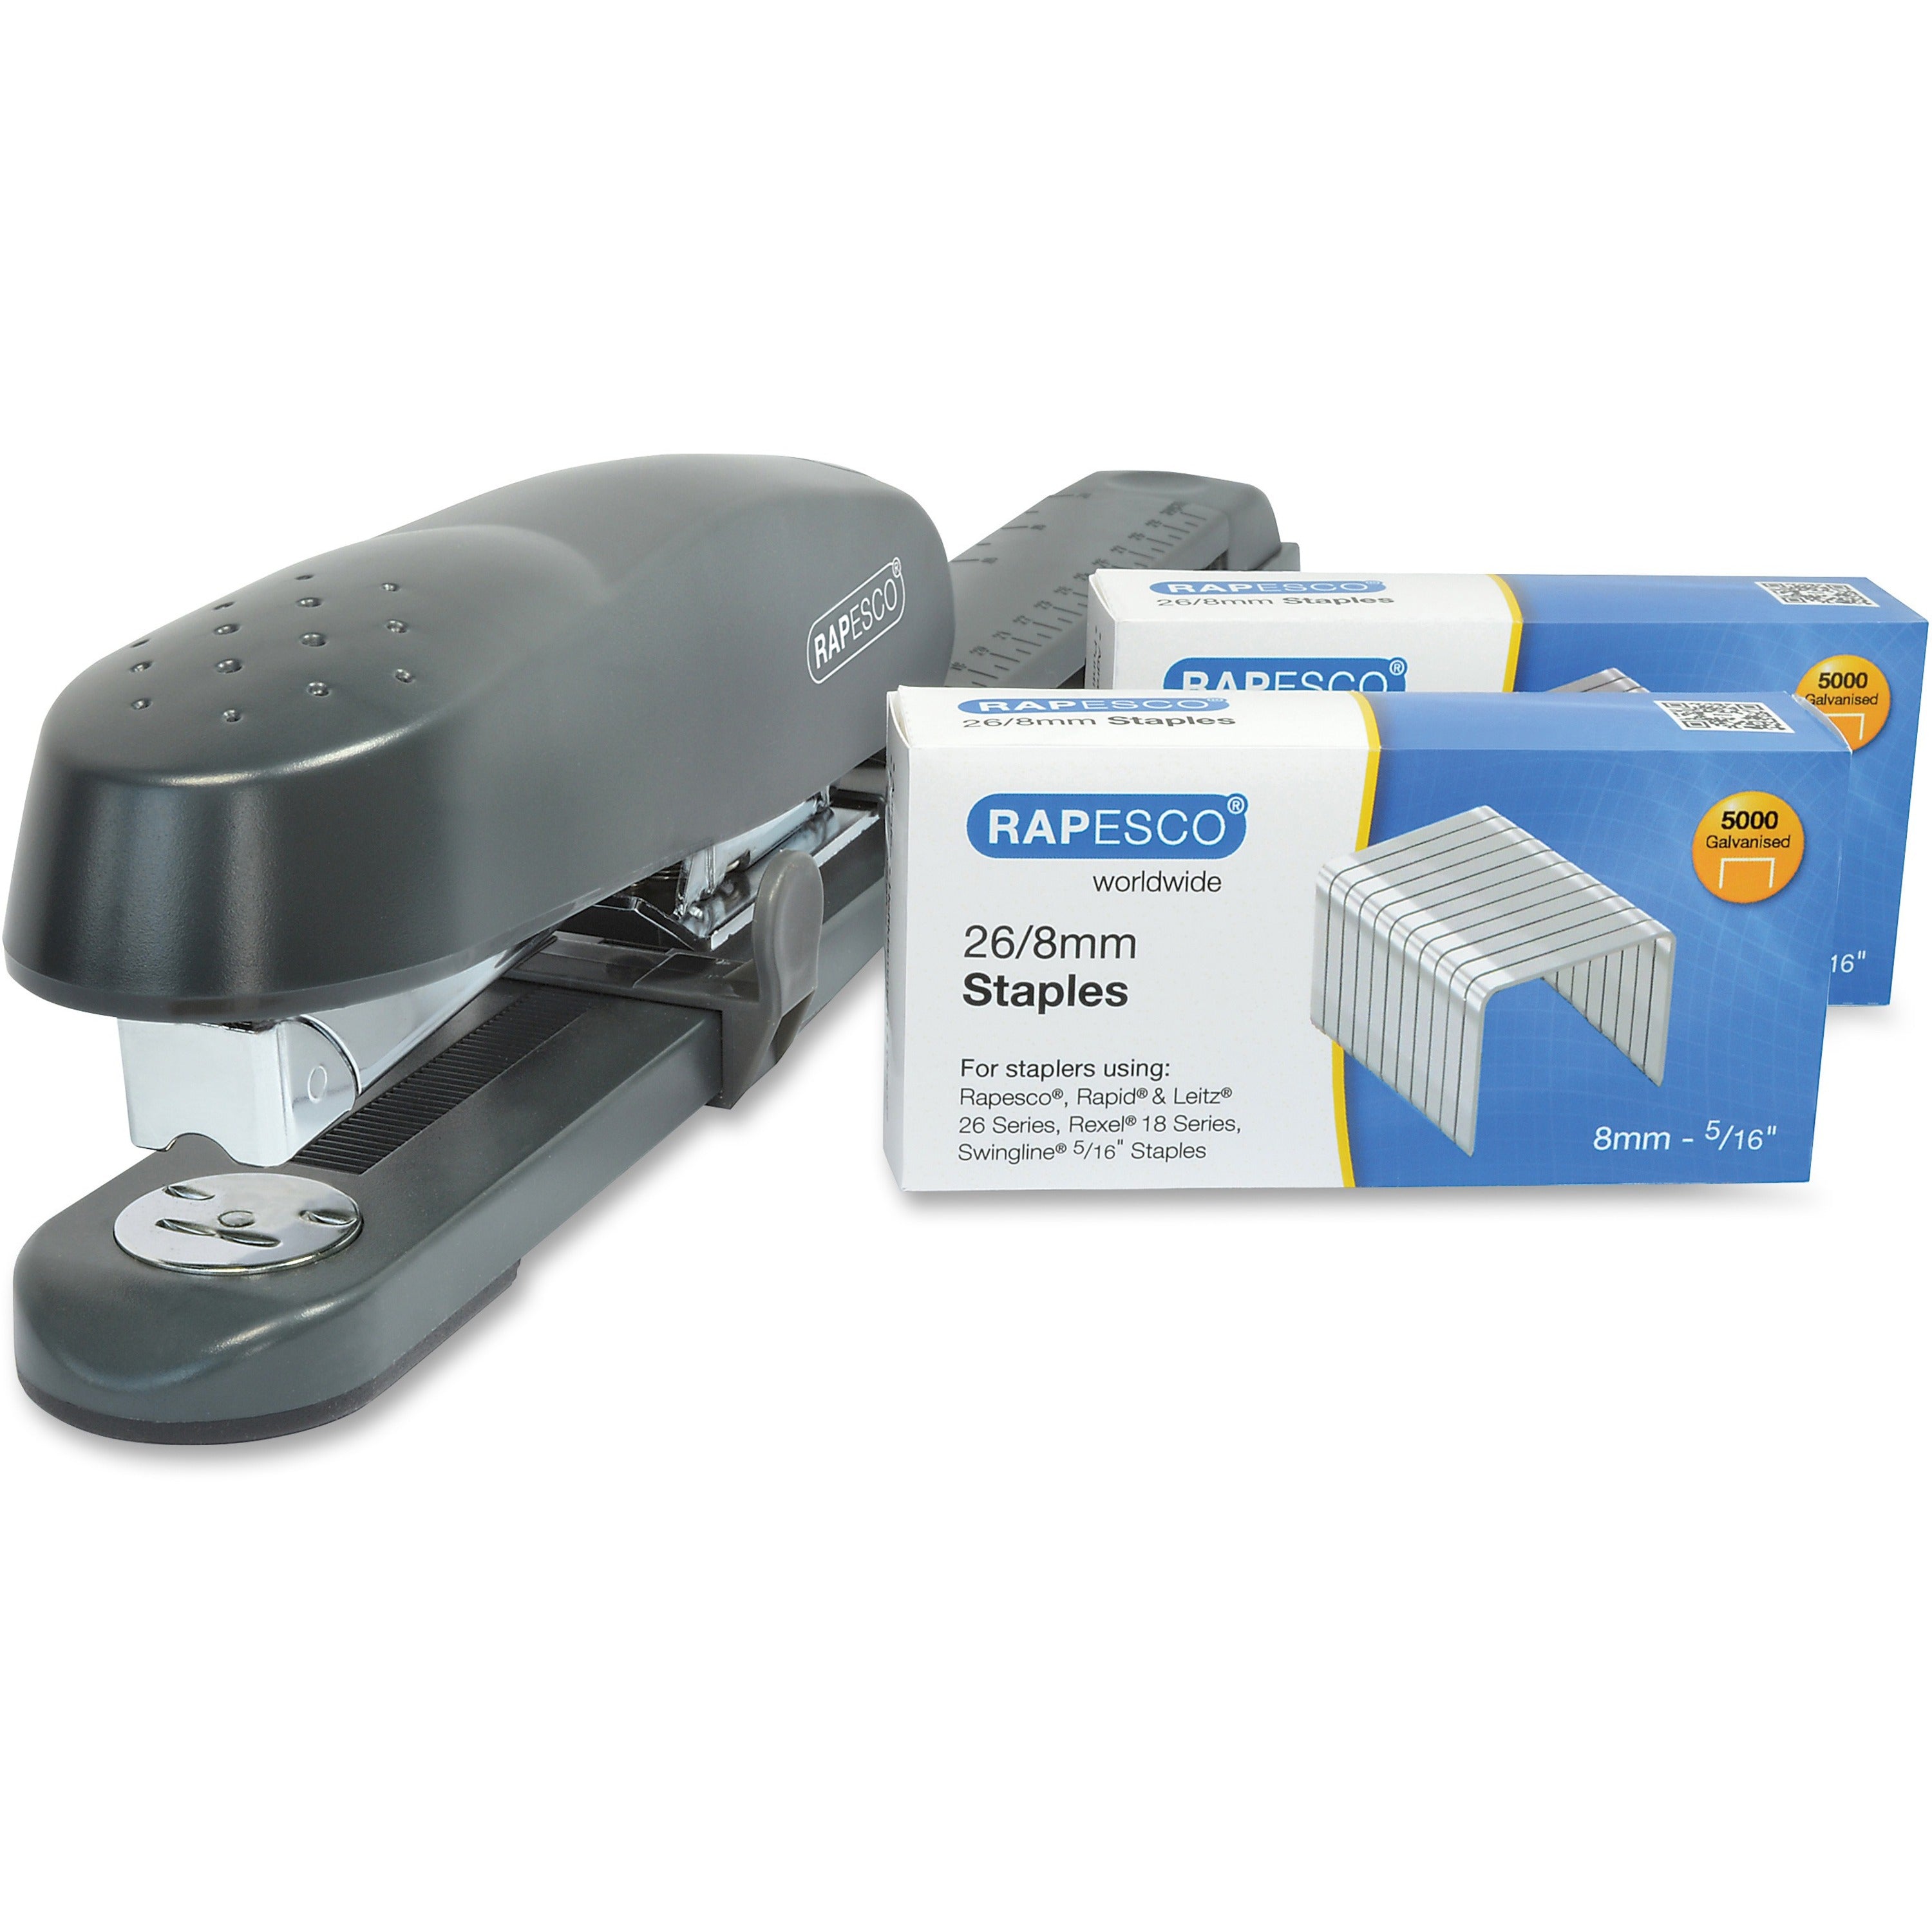 Rapesco 790 Long Arm Stapler with Staples Set - 50 of 80g/m2 Paper Sheets Capacity - 26/8mm, 24/8mm, 26/6mm, 24/6mm Staple Size - 1 Each